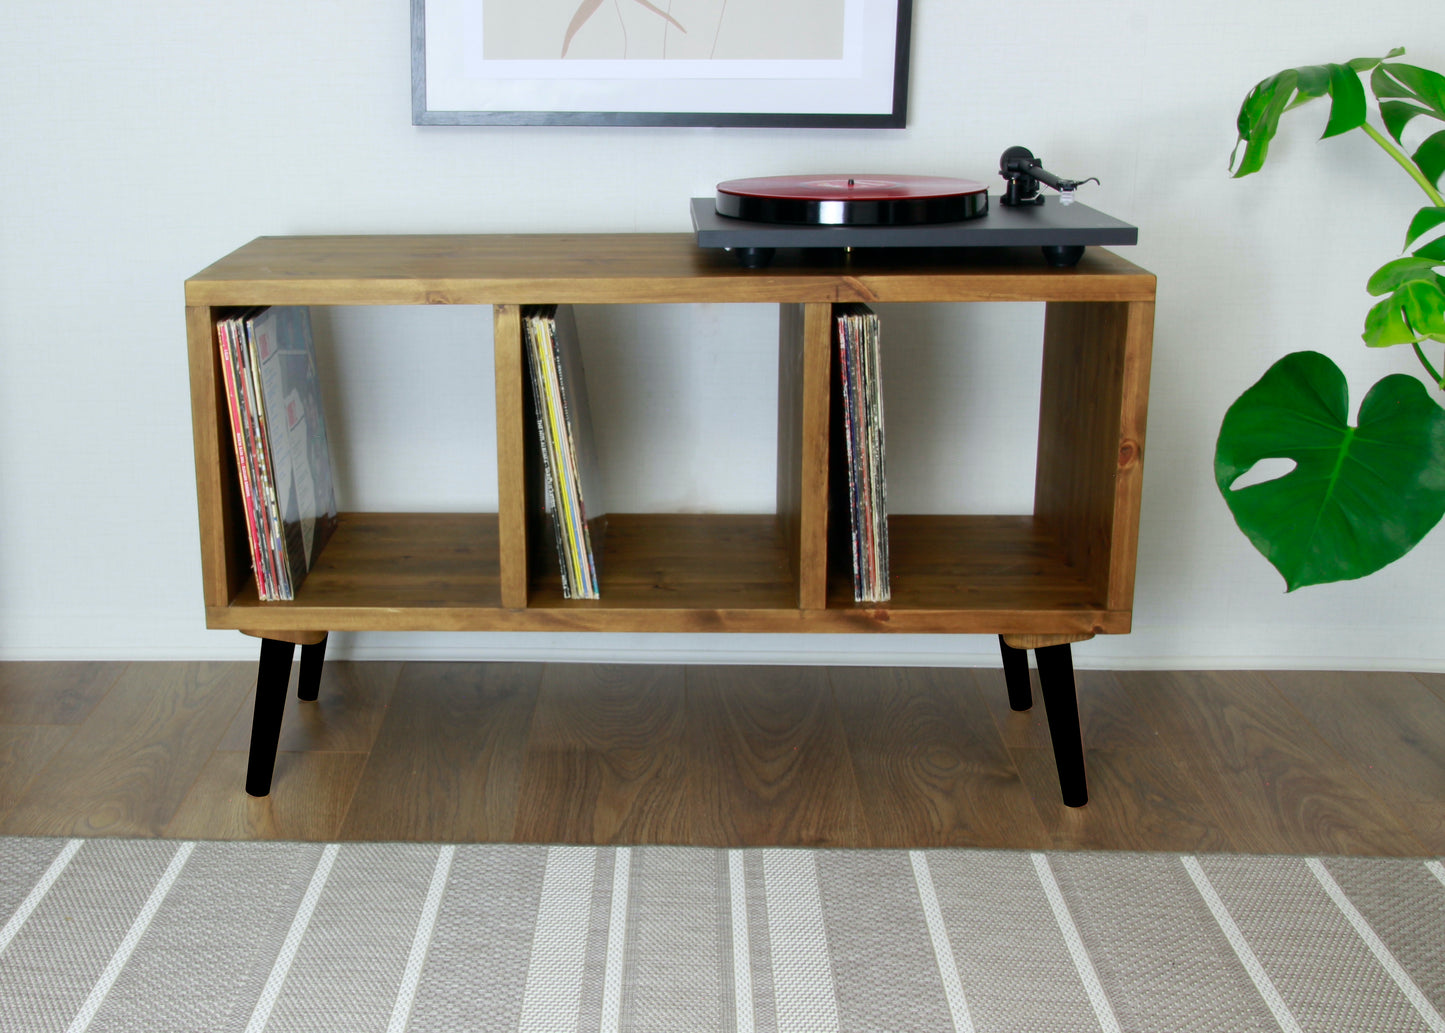 Wooden Turntable Stand, Vinyl Record Storage - Record Cabinet with black wooden feet COLOUR FURNITURE